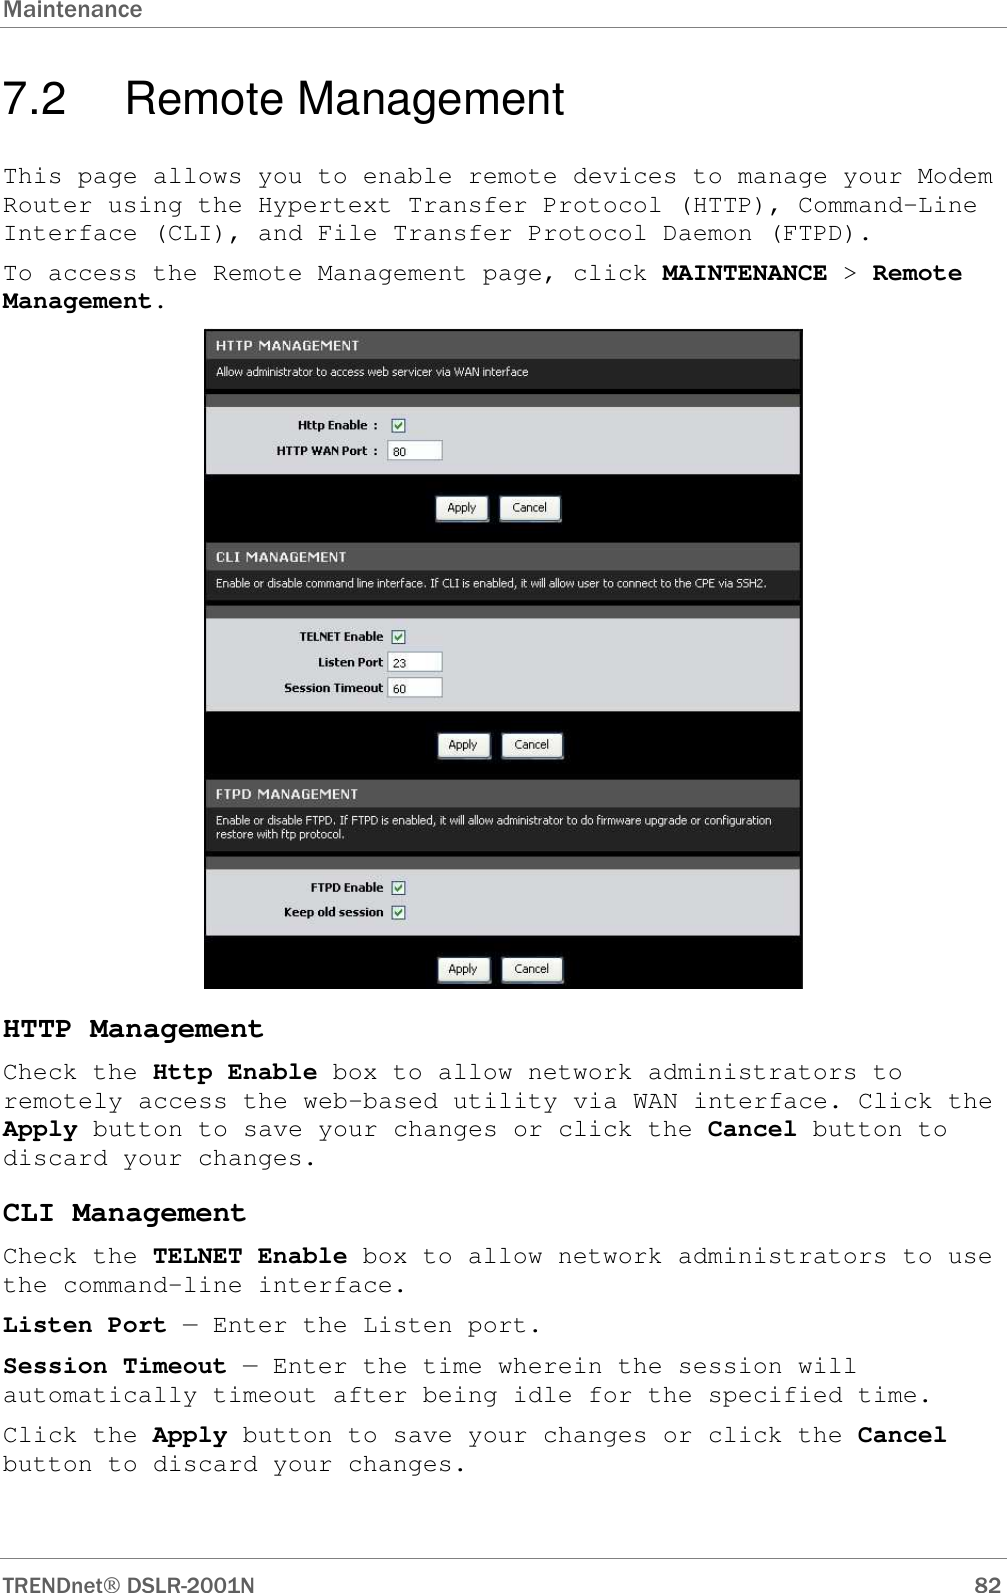 Maintenance      TRENDnet DSLR-2001N        82 7.2  Remote Management This page allows you to enable remote devices to manage your Modem Router using the Hypertext Transfer Protocol (HTTP), Command-Line Interface (CLI), and File Transfer Protocol Daemon (FTPD). To access the Remote Management page, click MAINTENANCE &gt; Remote Management.  HTTP Management Check the Http Enable box to allow network administrators to remotely access the web-based utility via WAN interface. Click the Apply button to save your changes or click the Cancel button to discard your changes. CLI Management Check the TELNET Enable box to allow network administrators to use the command-line interface. Listen Port — Enter the Listen port. Session Timeout — Enter the time wherein the session will automatically timeout after being idle for the specified time. Click the Apply button to save your changes or click the Cancel button to discard your changes.  